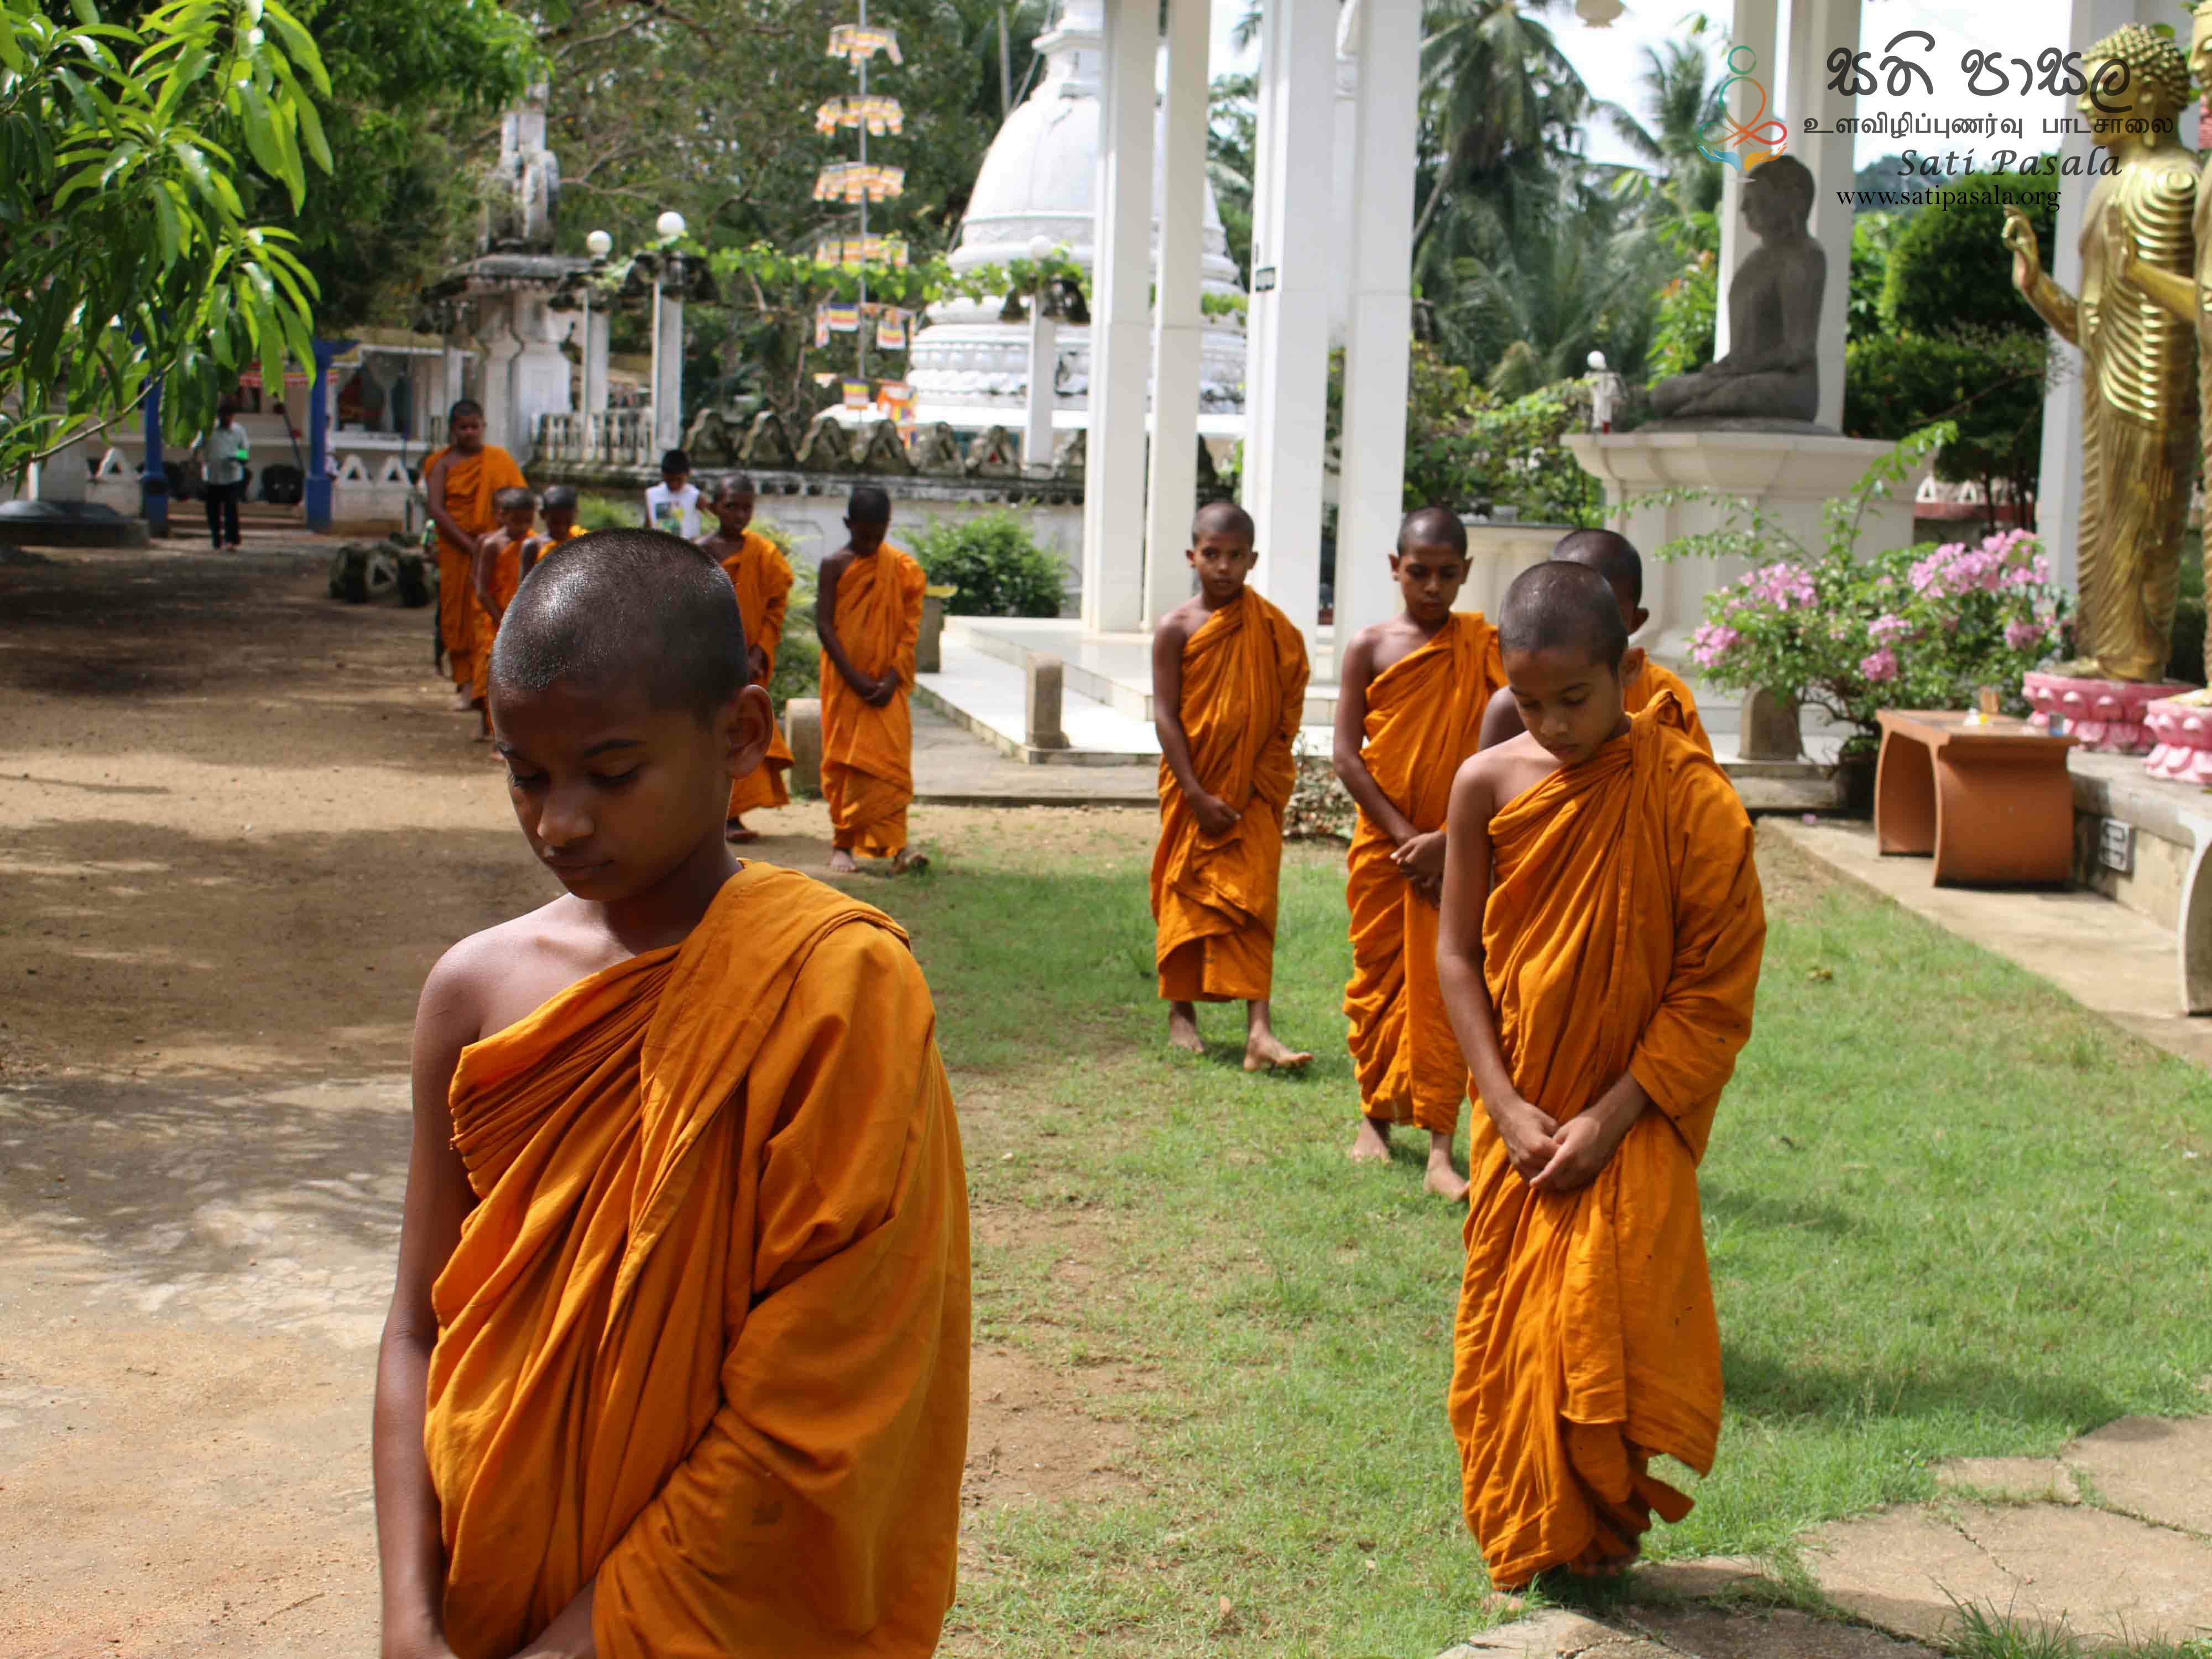 Monthly Sati Pasala for Venerable Members of the Clergy -12th March 2019